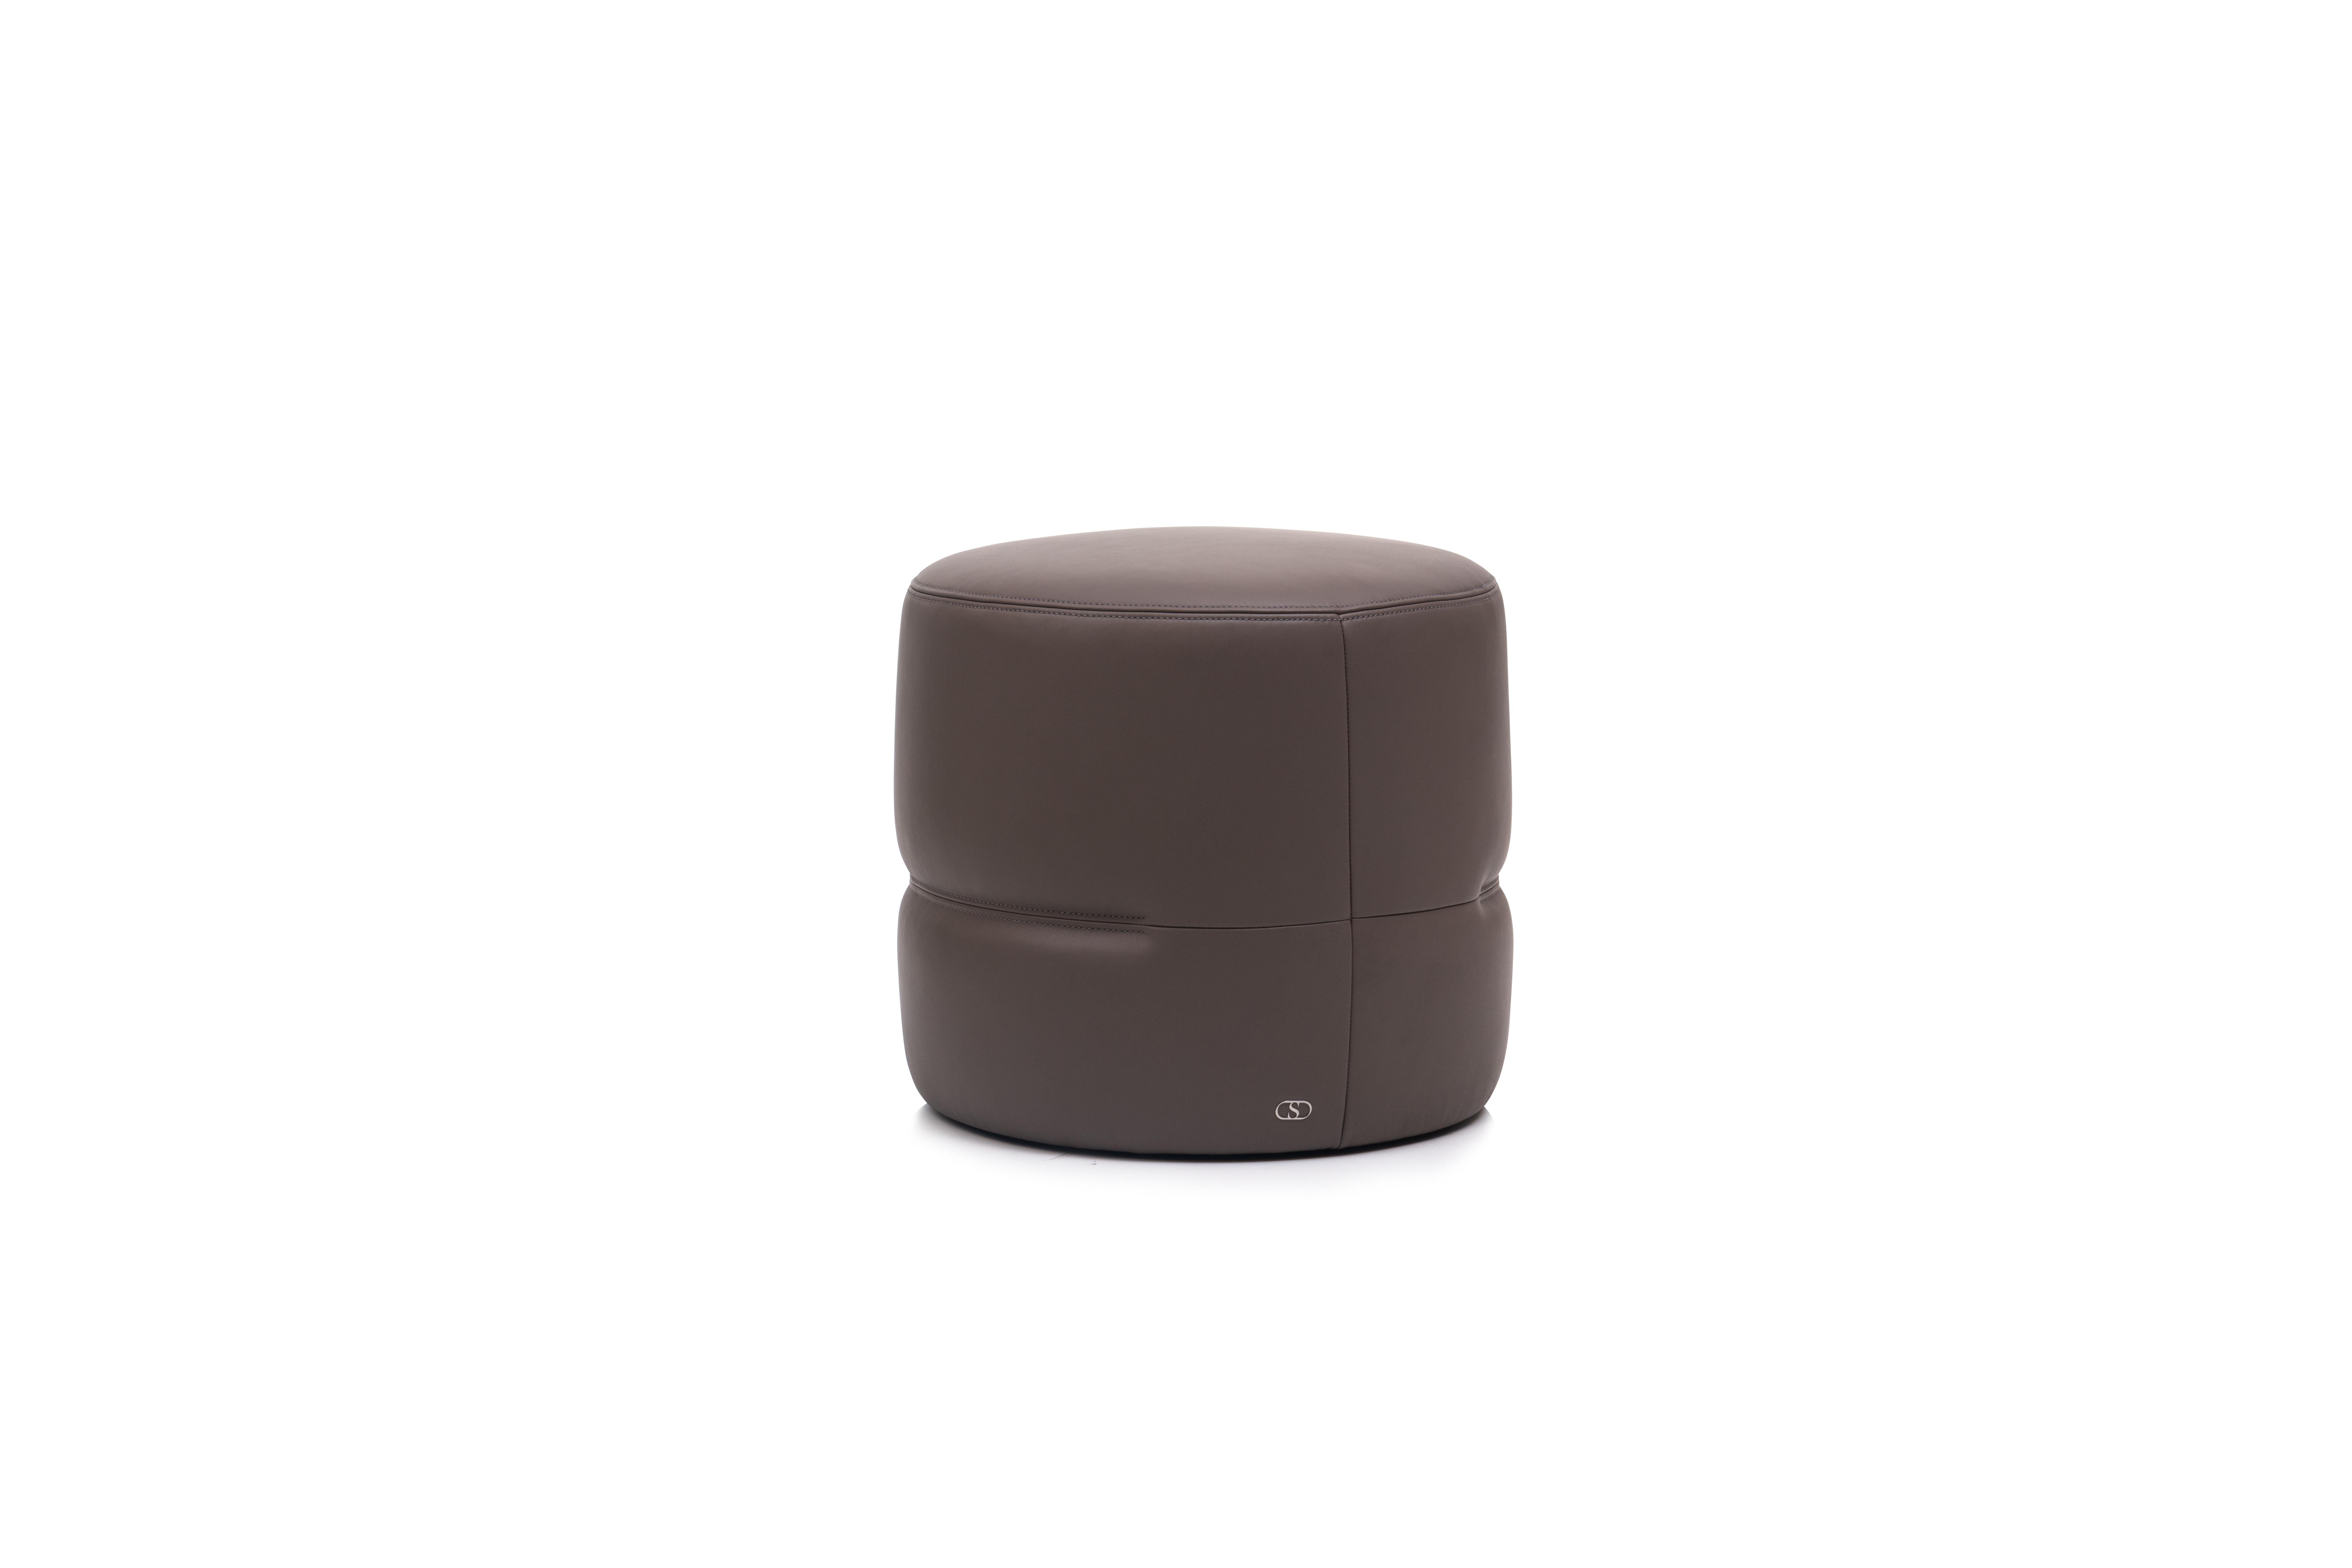 DS-760 Pouf by De Sede
Dimensions: D 48 x H 47 cm
Materials: wood, leather

Prices may change according to the chosen materials and size. 

Elegance manifests itself in simplicity

“Less is more” is the motto for the pouf DS-760. The stool